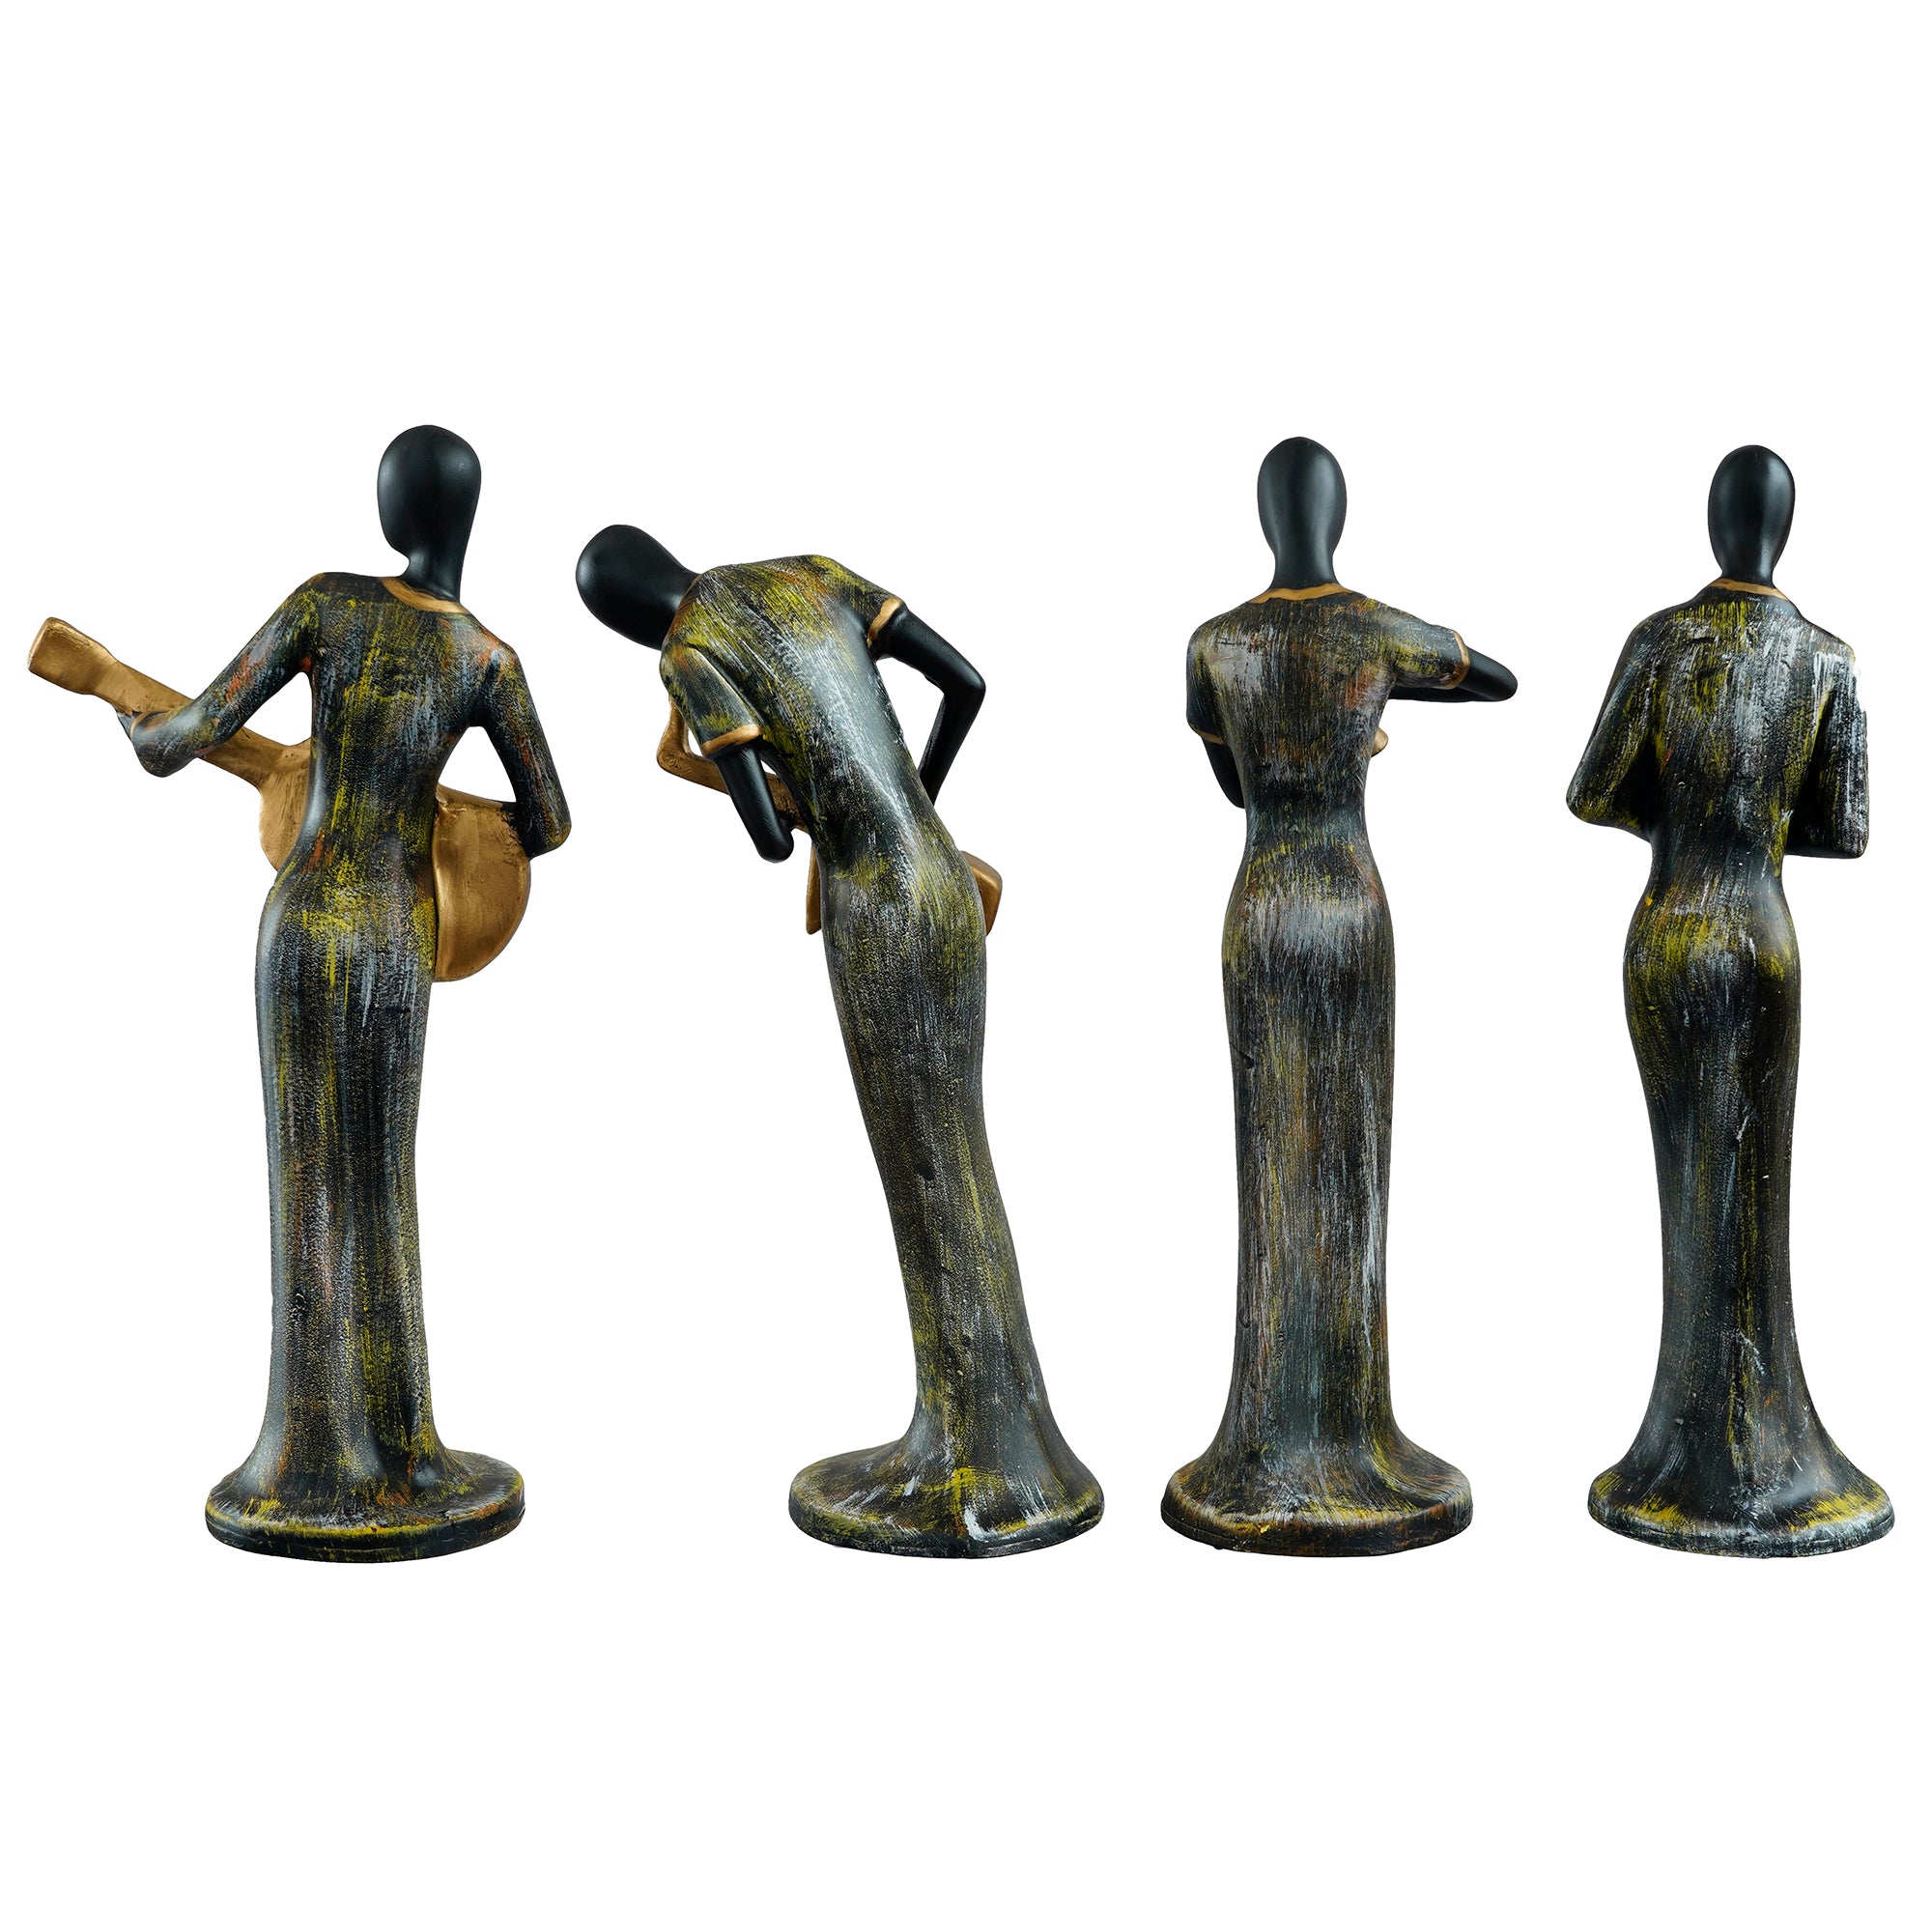 Grey and Black Polyresin Set of 4 Ladies figurines Playing Clarinet, Guitar, Wind, Saxophone Musical Instrument Handcrafted Decorative Showpiece 6